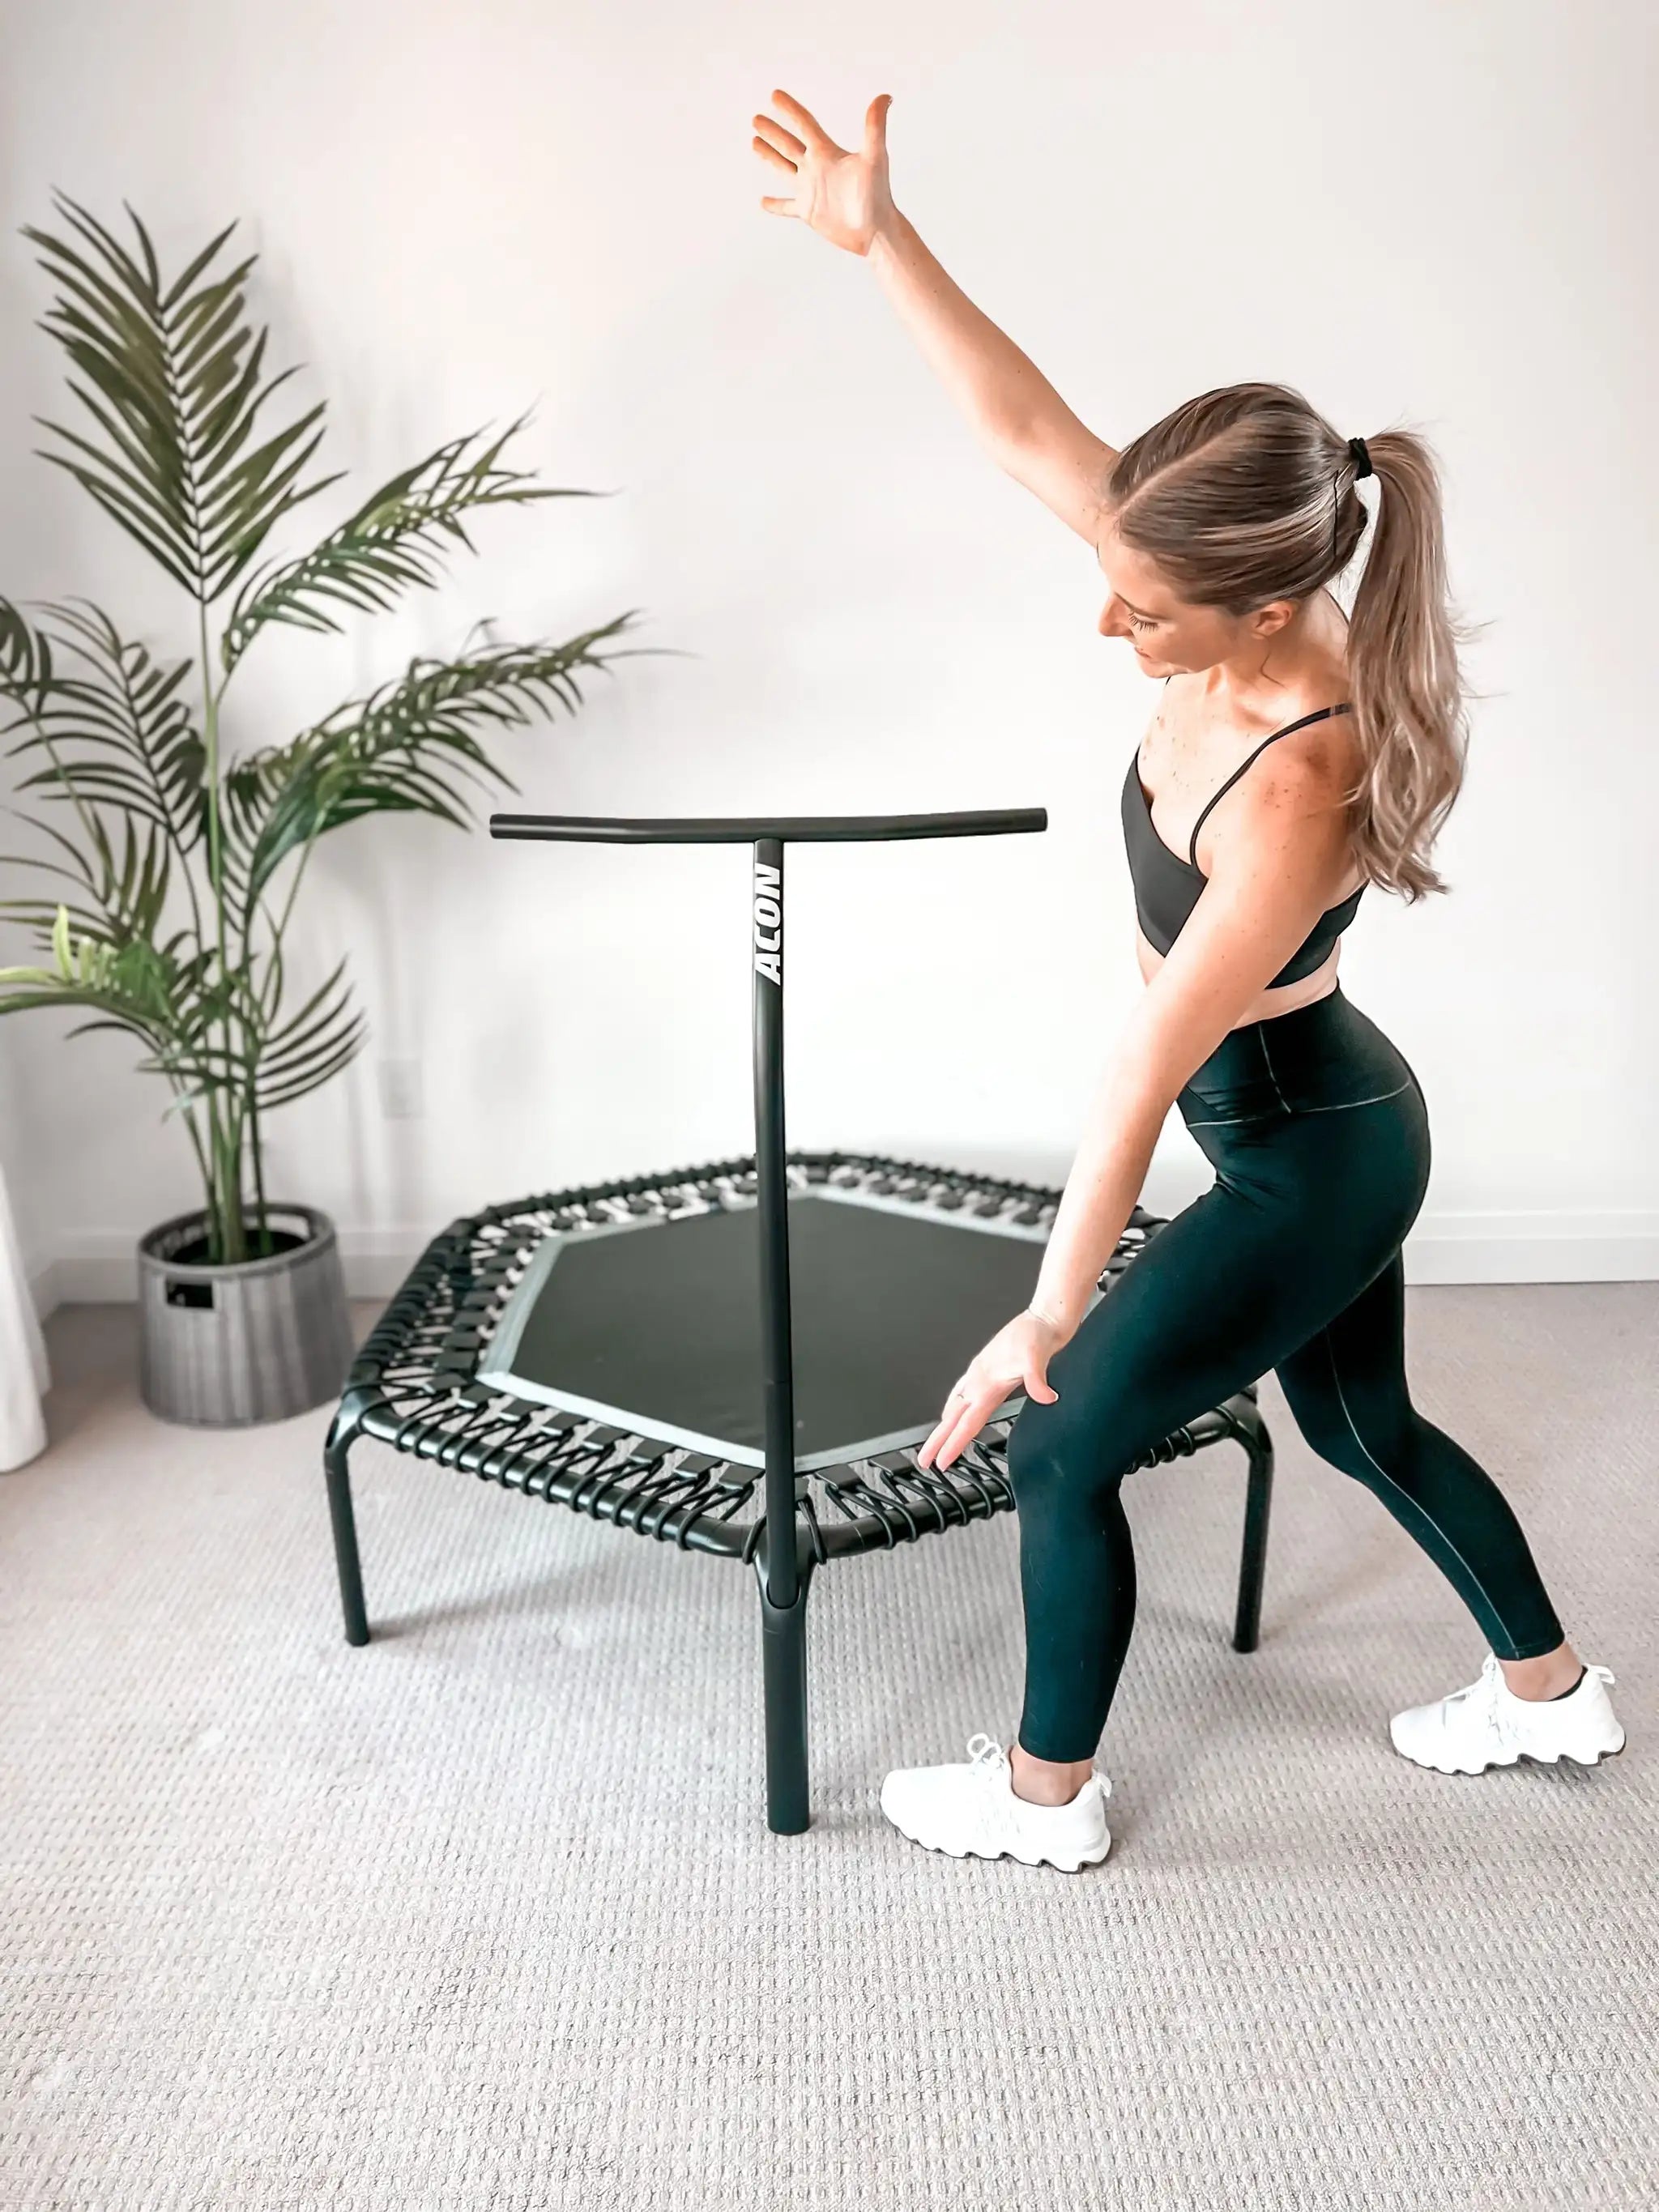 A trampoline fitness instructor Sydney posing with ACON rebounder trampoline.